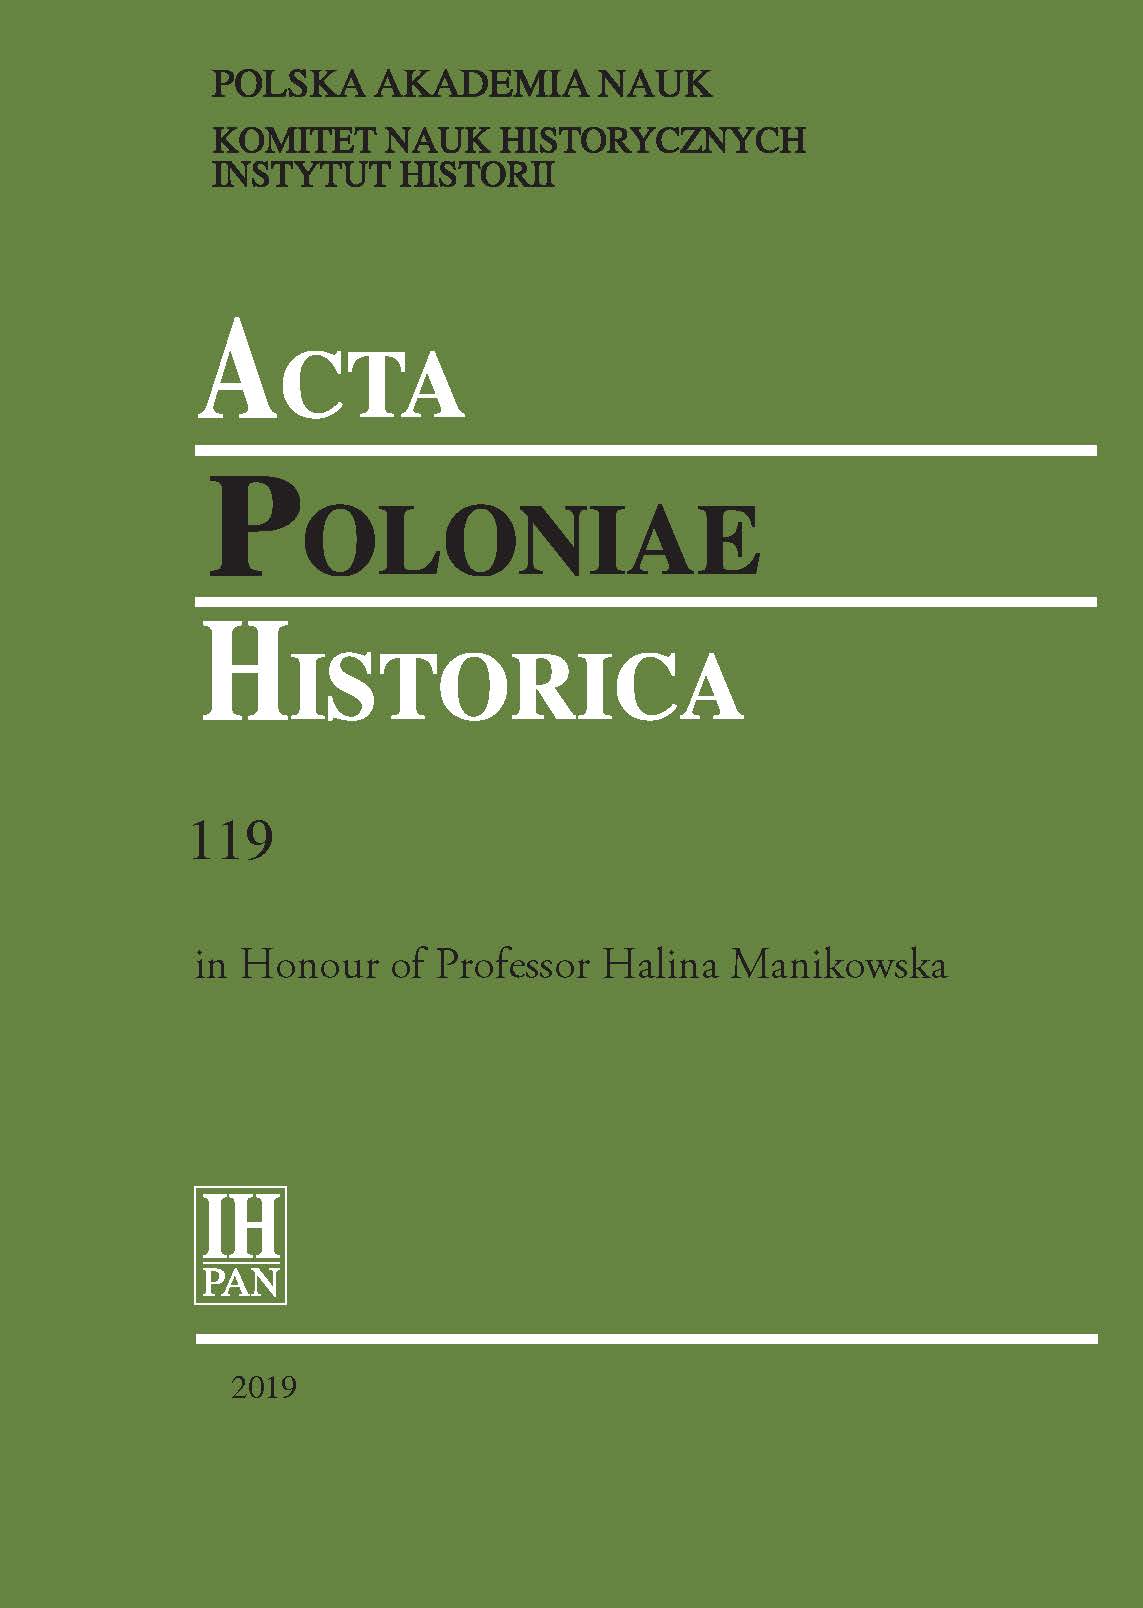 St Adalbertus domesticus. Patterns of Missioning and Episcopal Power in Poland and Scandinavia, in the Eleven to Thirteenth Centuries Cover Image